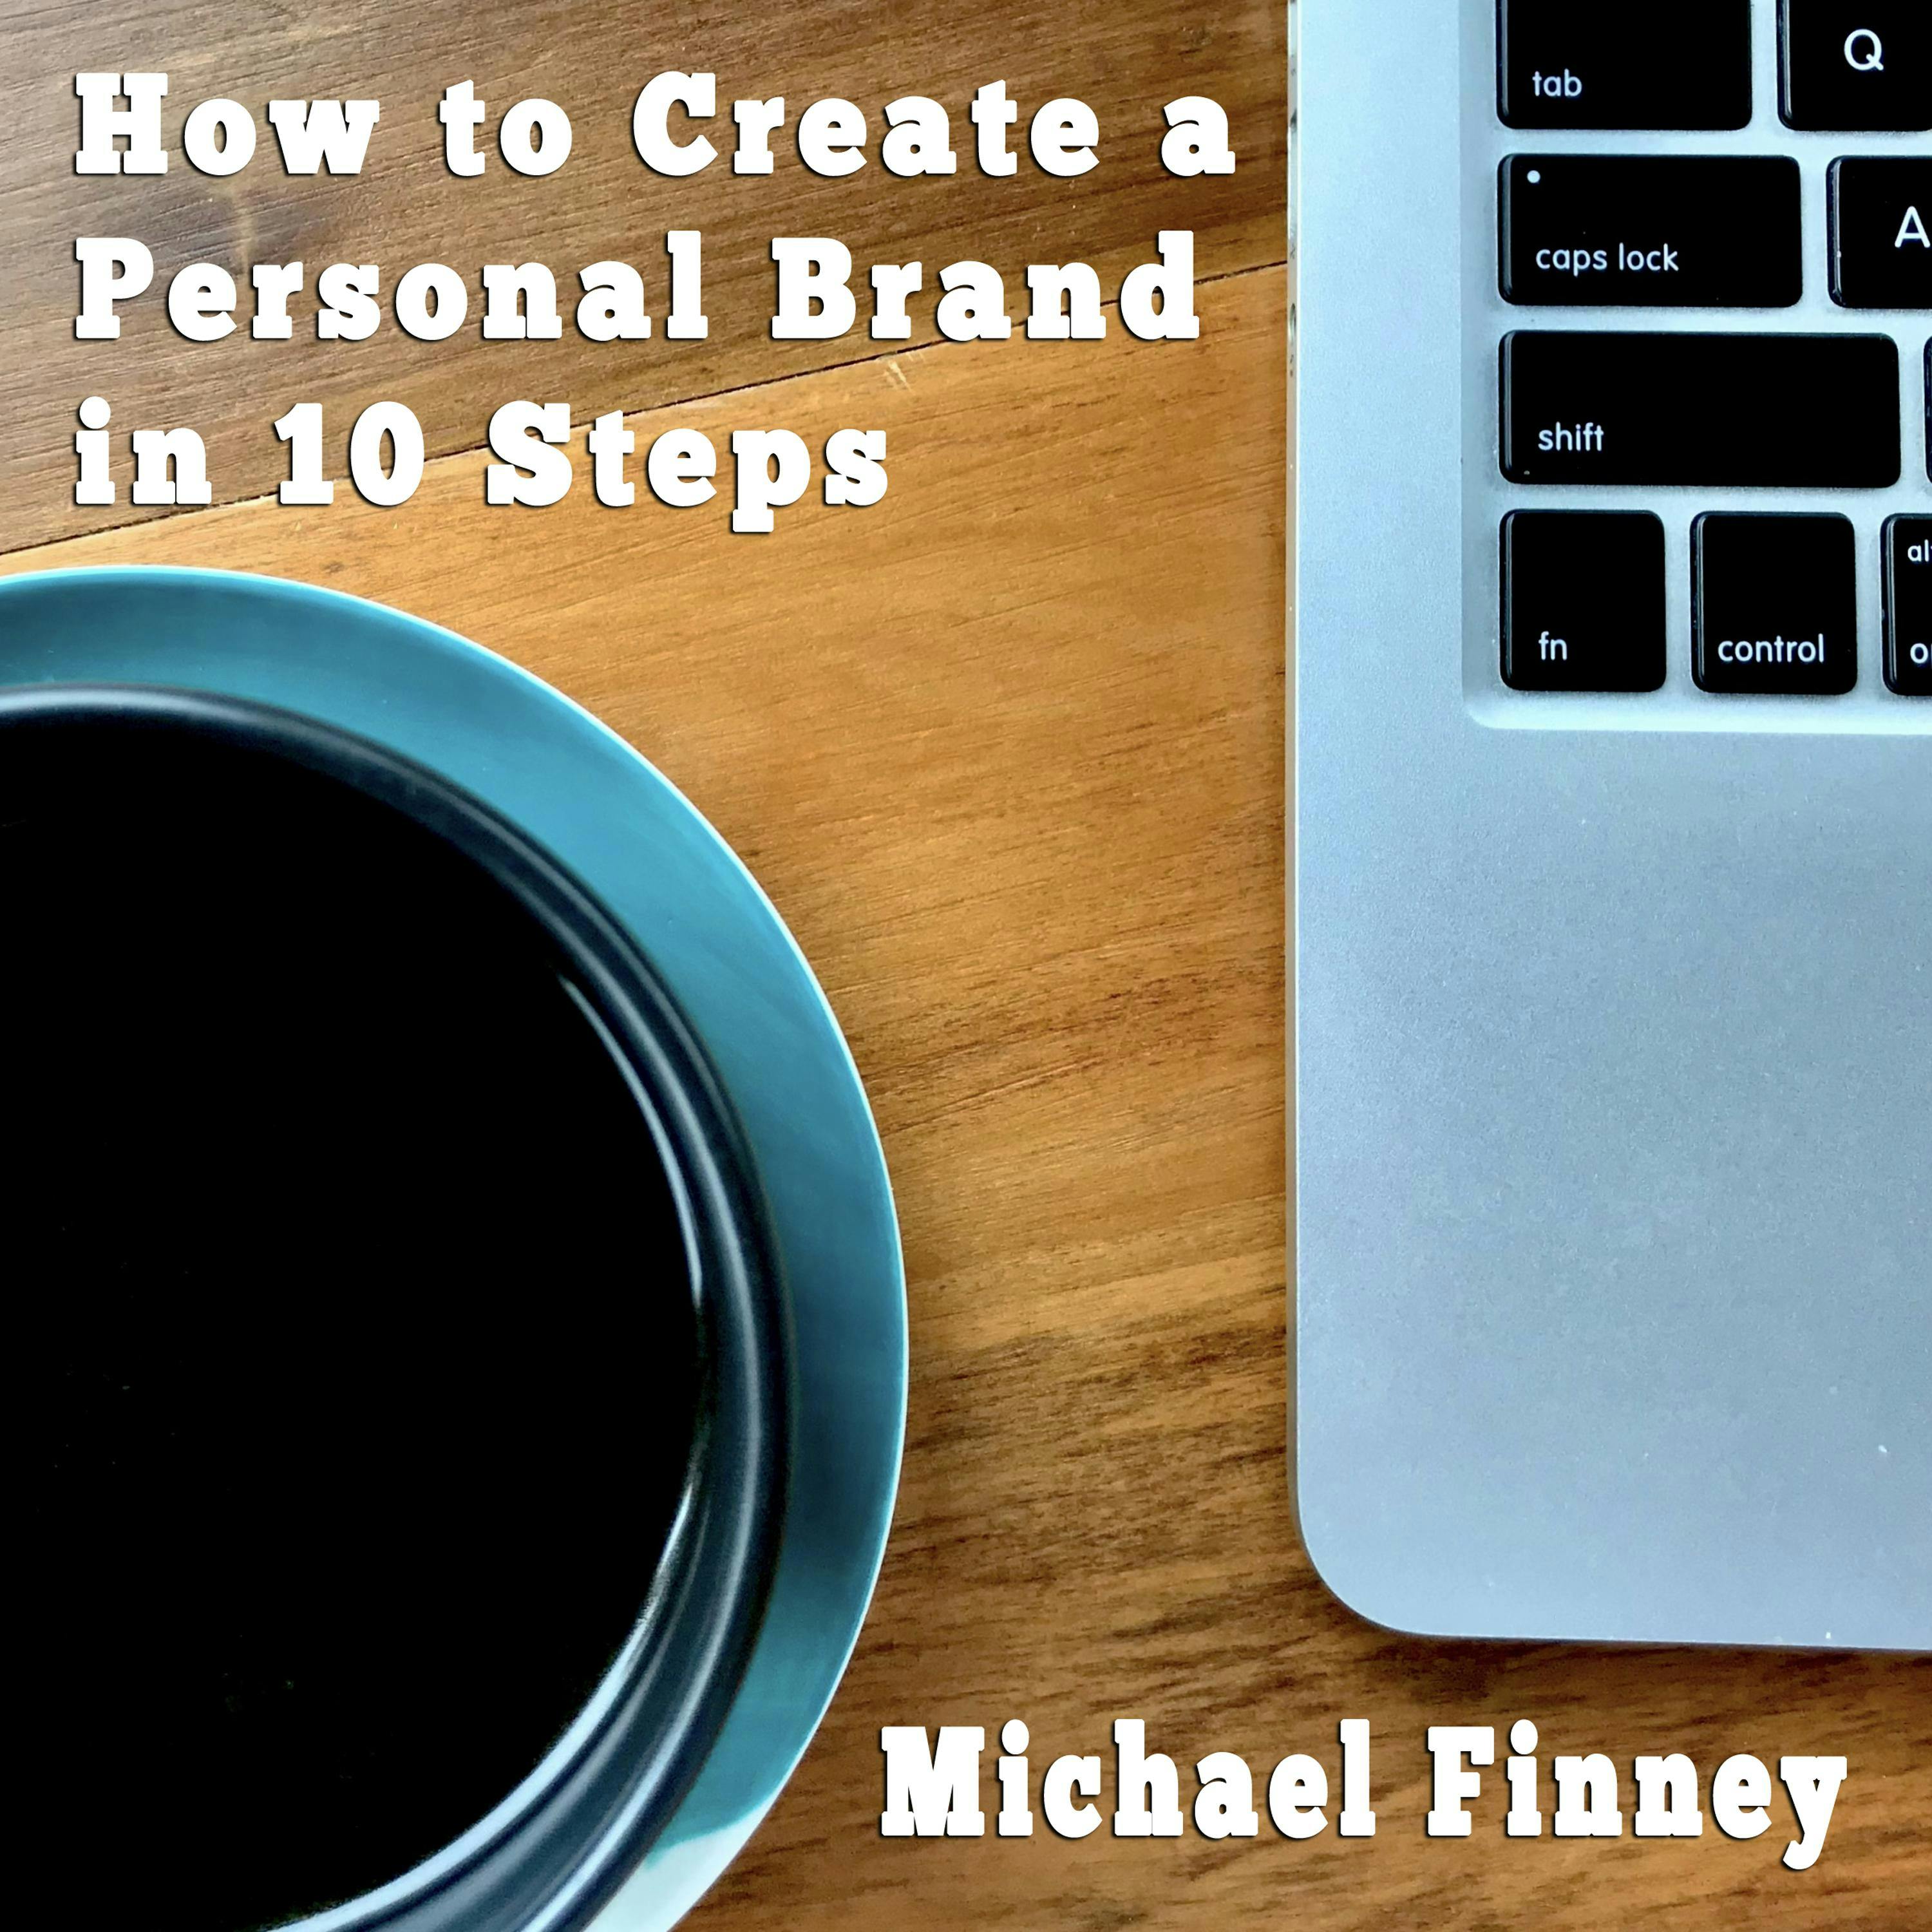 How to Create a Personal Brand in 10 Steps: Content development workbook for beginners - Michael Finney